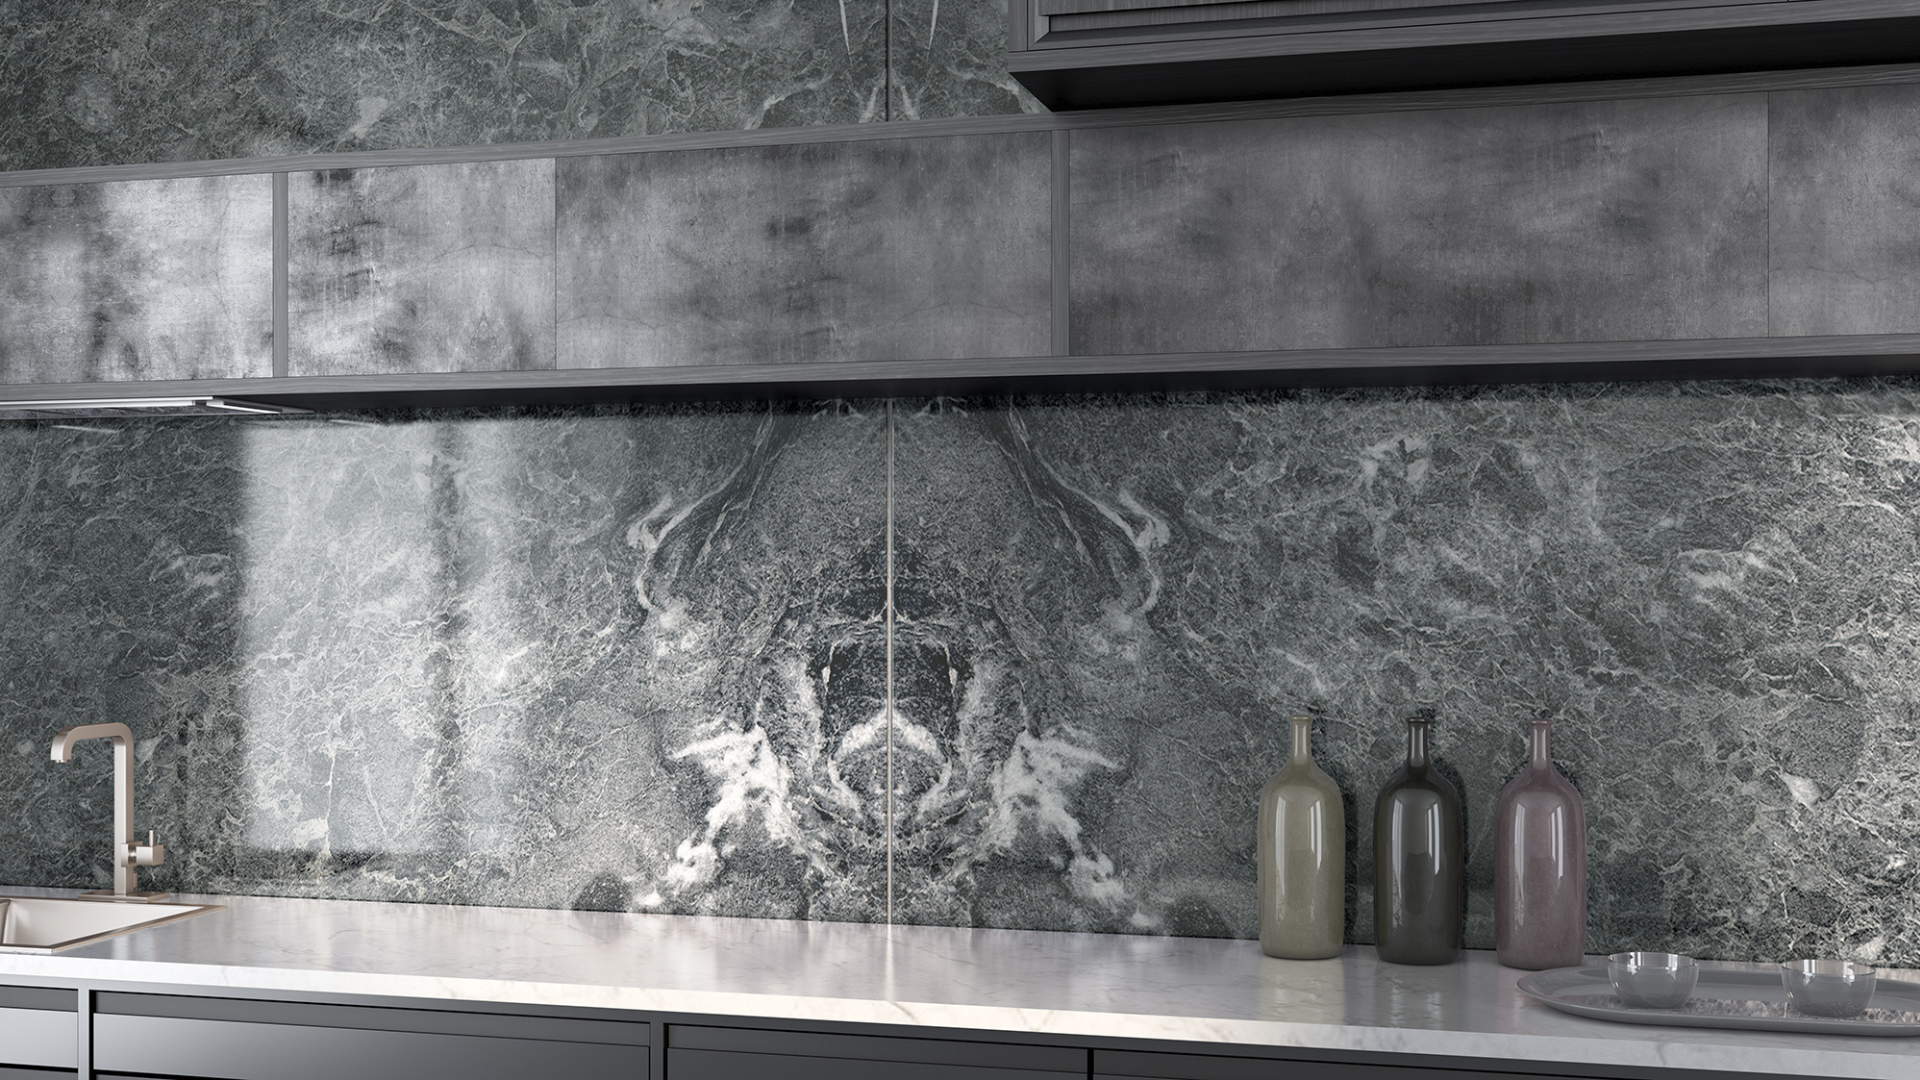 Kitchen backsplash with grey marble slabs with white distinct veins for a unique look in your kitchen